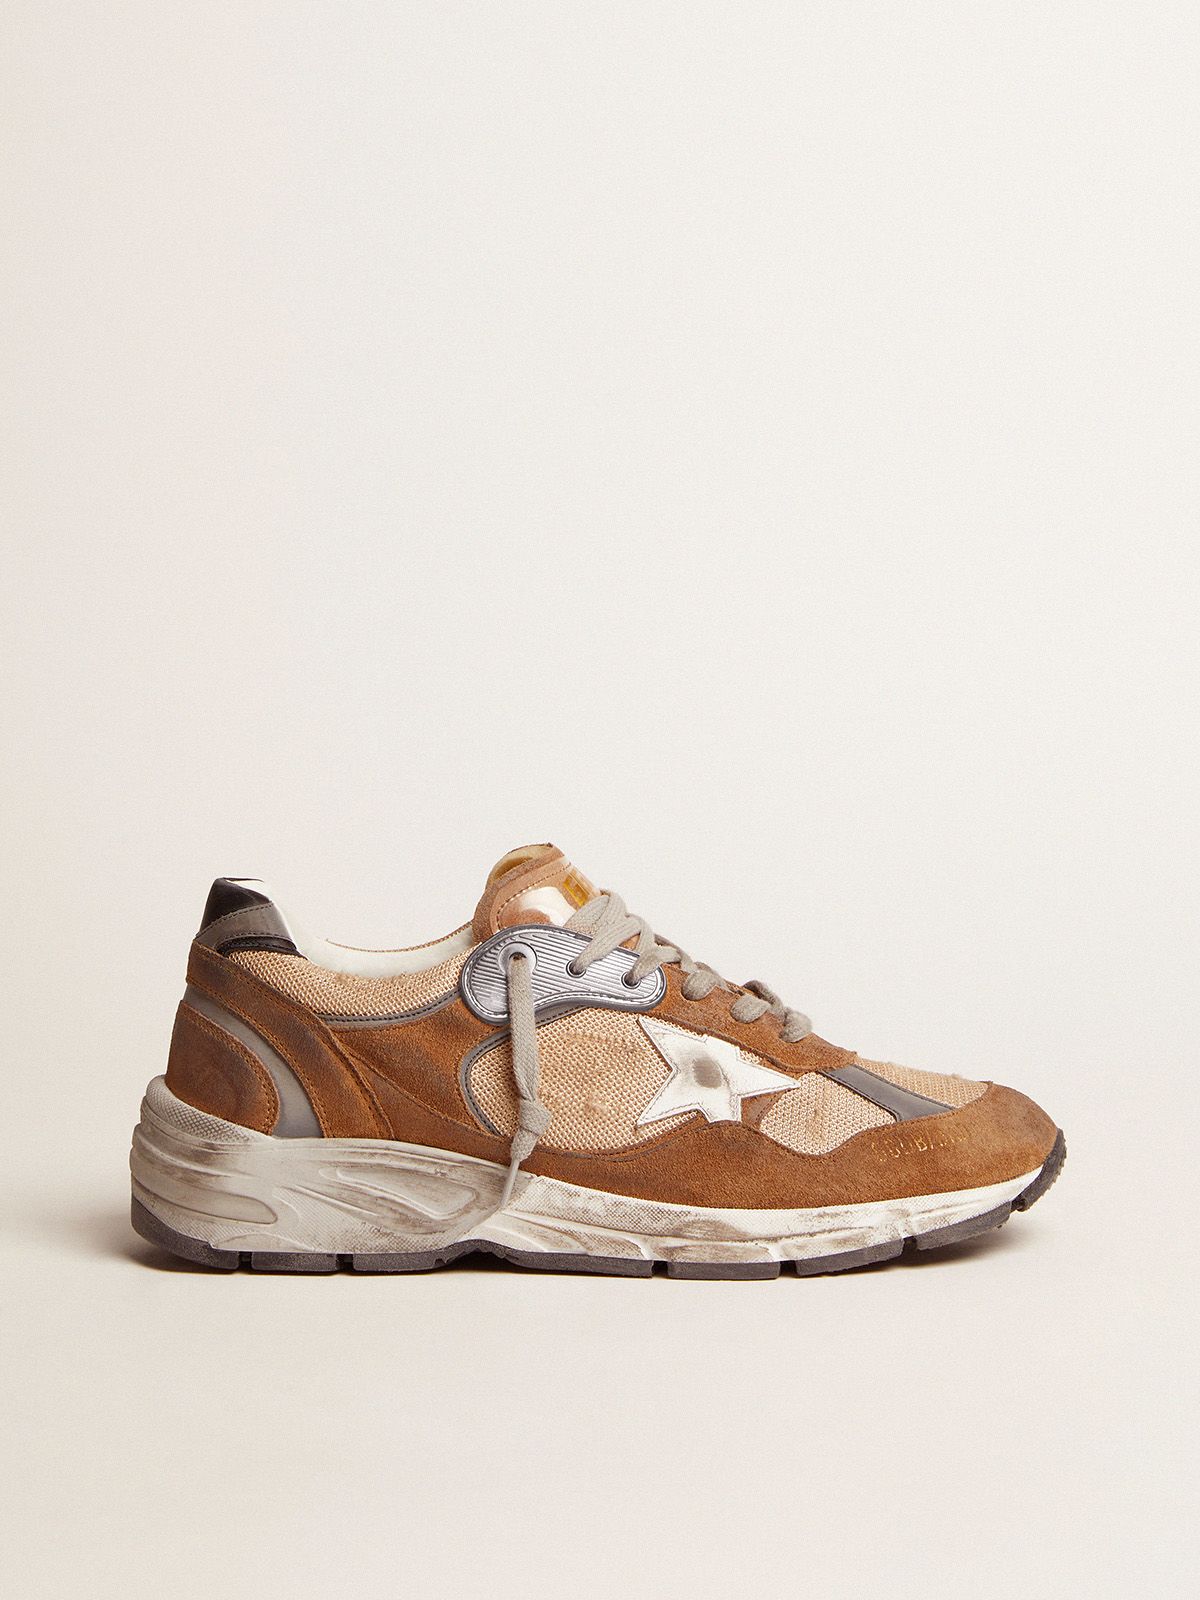 golden goose and star black Dad-Star heel leather mesh in sneakers white tab with suede tobacco-colored